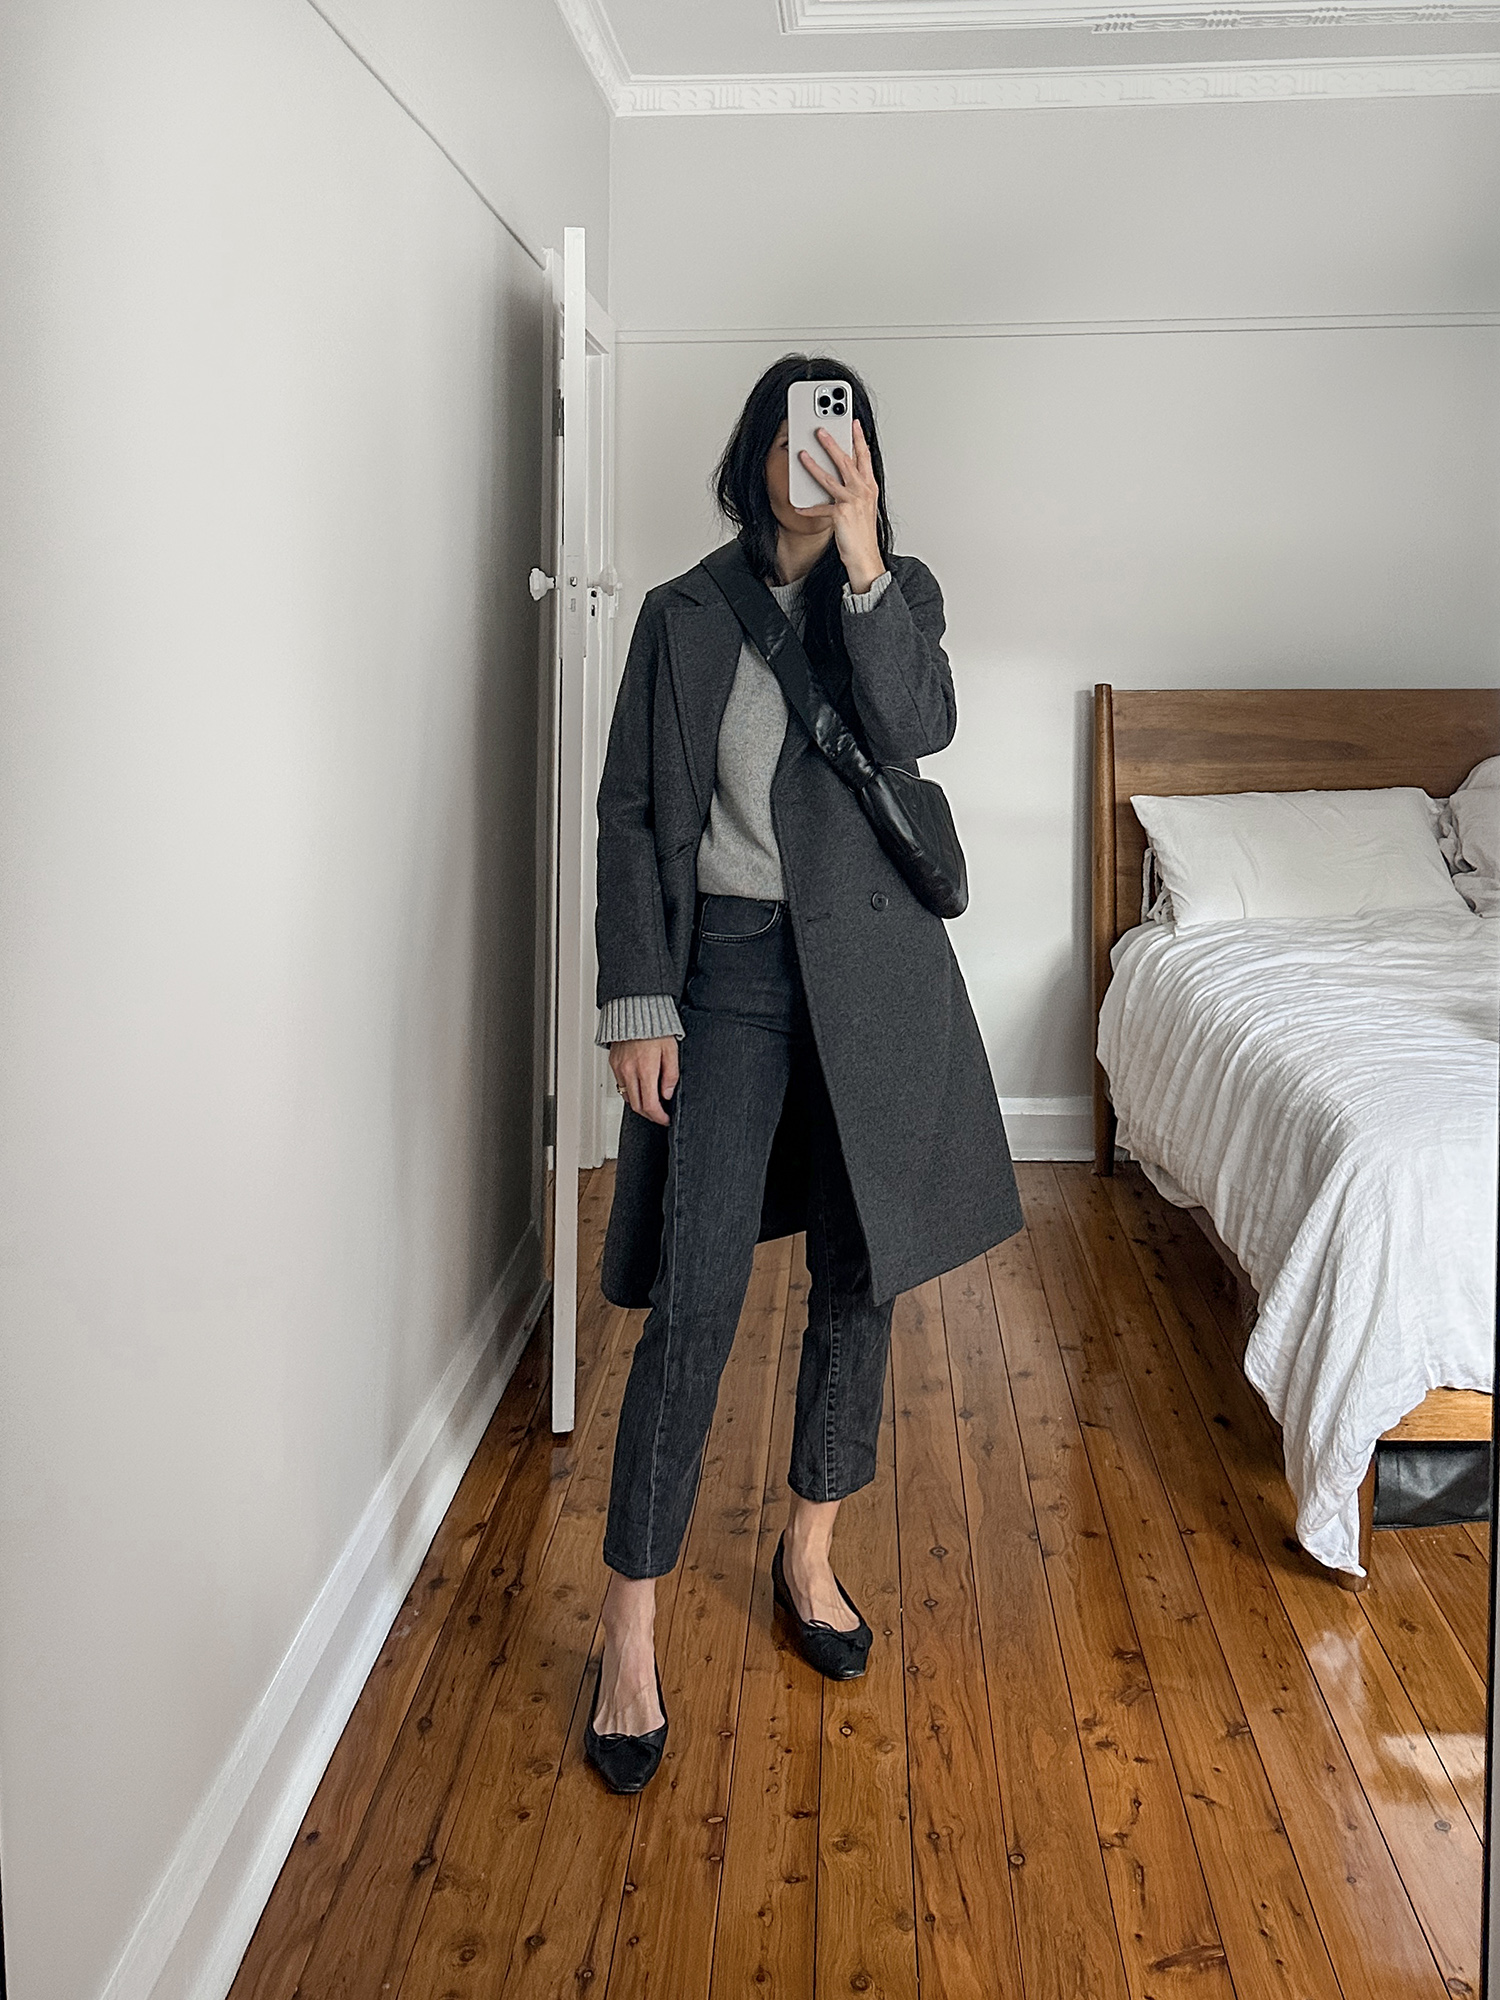 wearing Jenni Kayne sweater with Toteme jeans and Everlane rewool coat